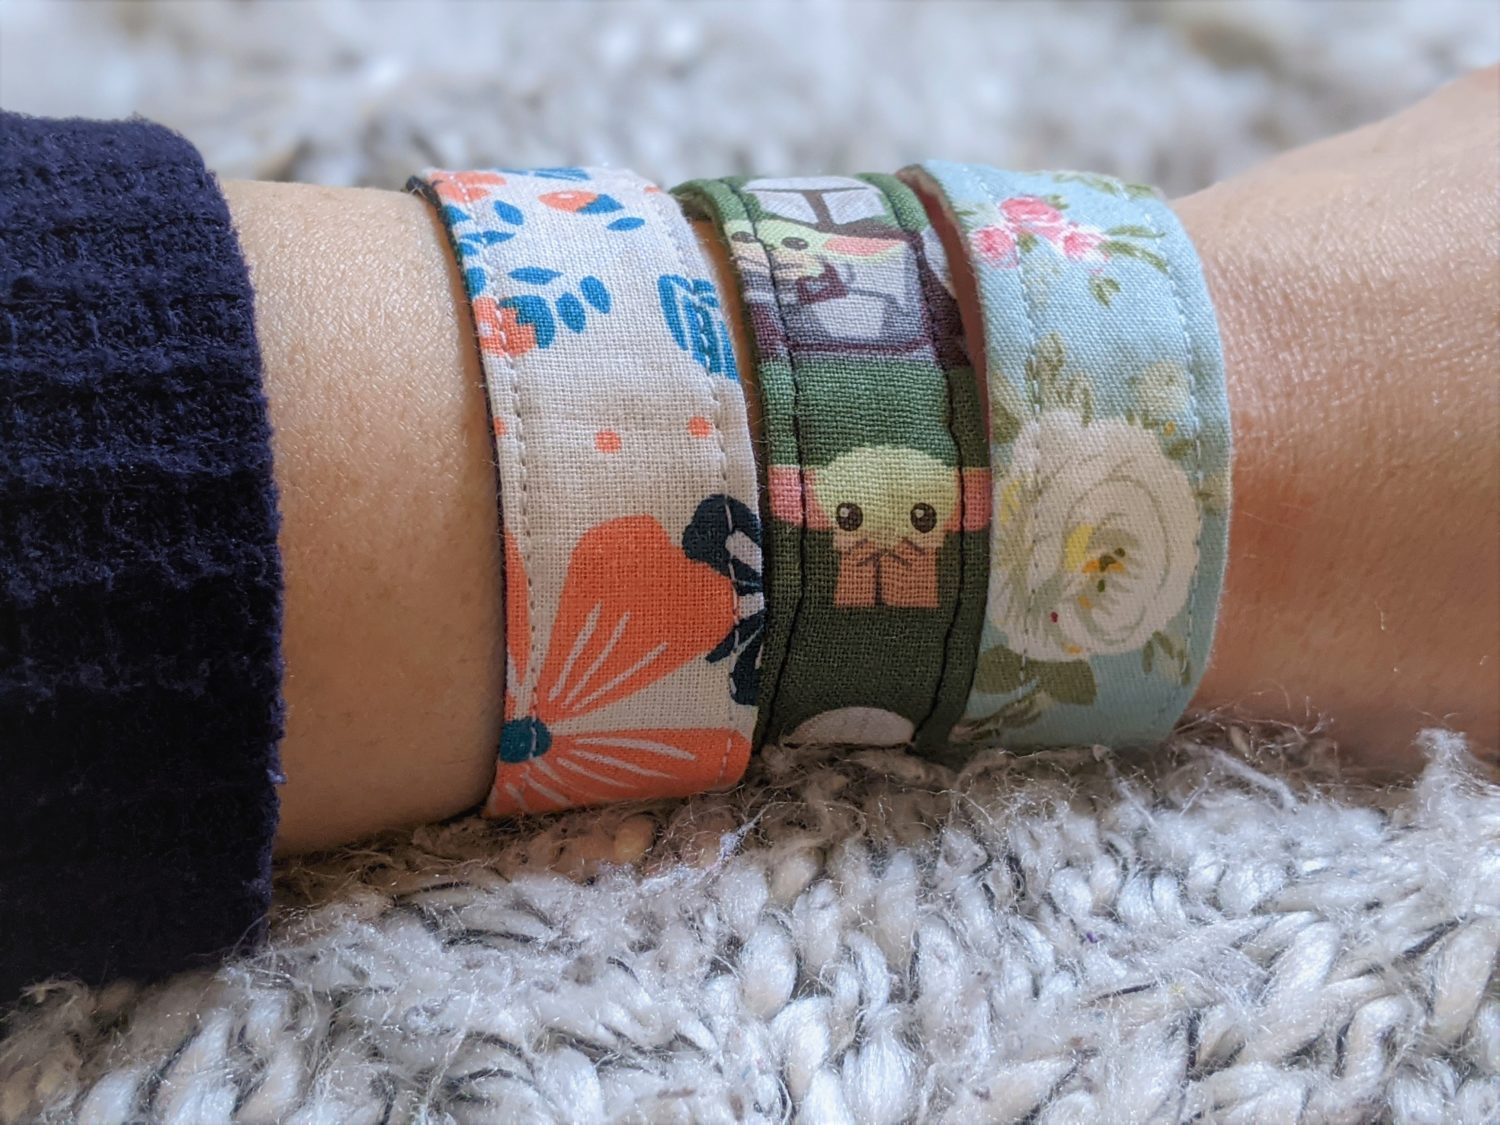 Upcycle Your Plastic Bags with This Easy DIY: Yarn-Wrapped Bracelets -  ACCESSORY-MU Handcrafted Jewelry, Crafts & Graphic Design